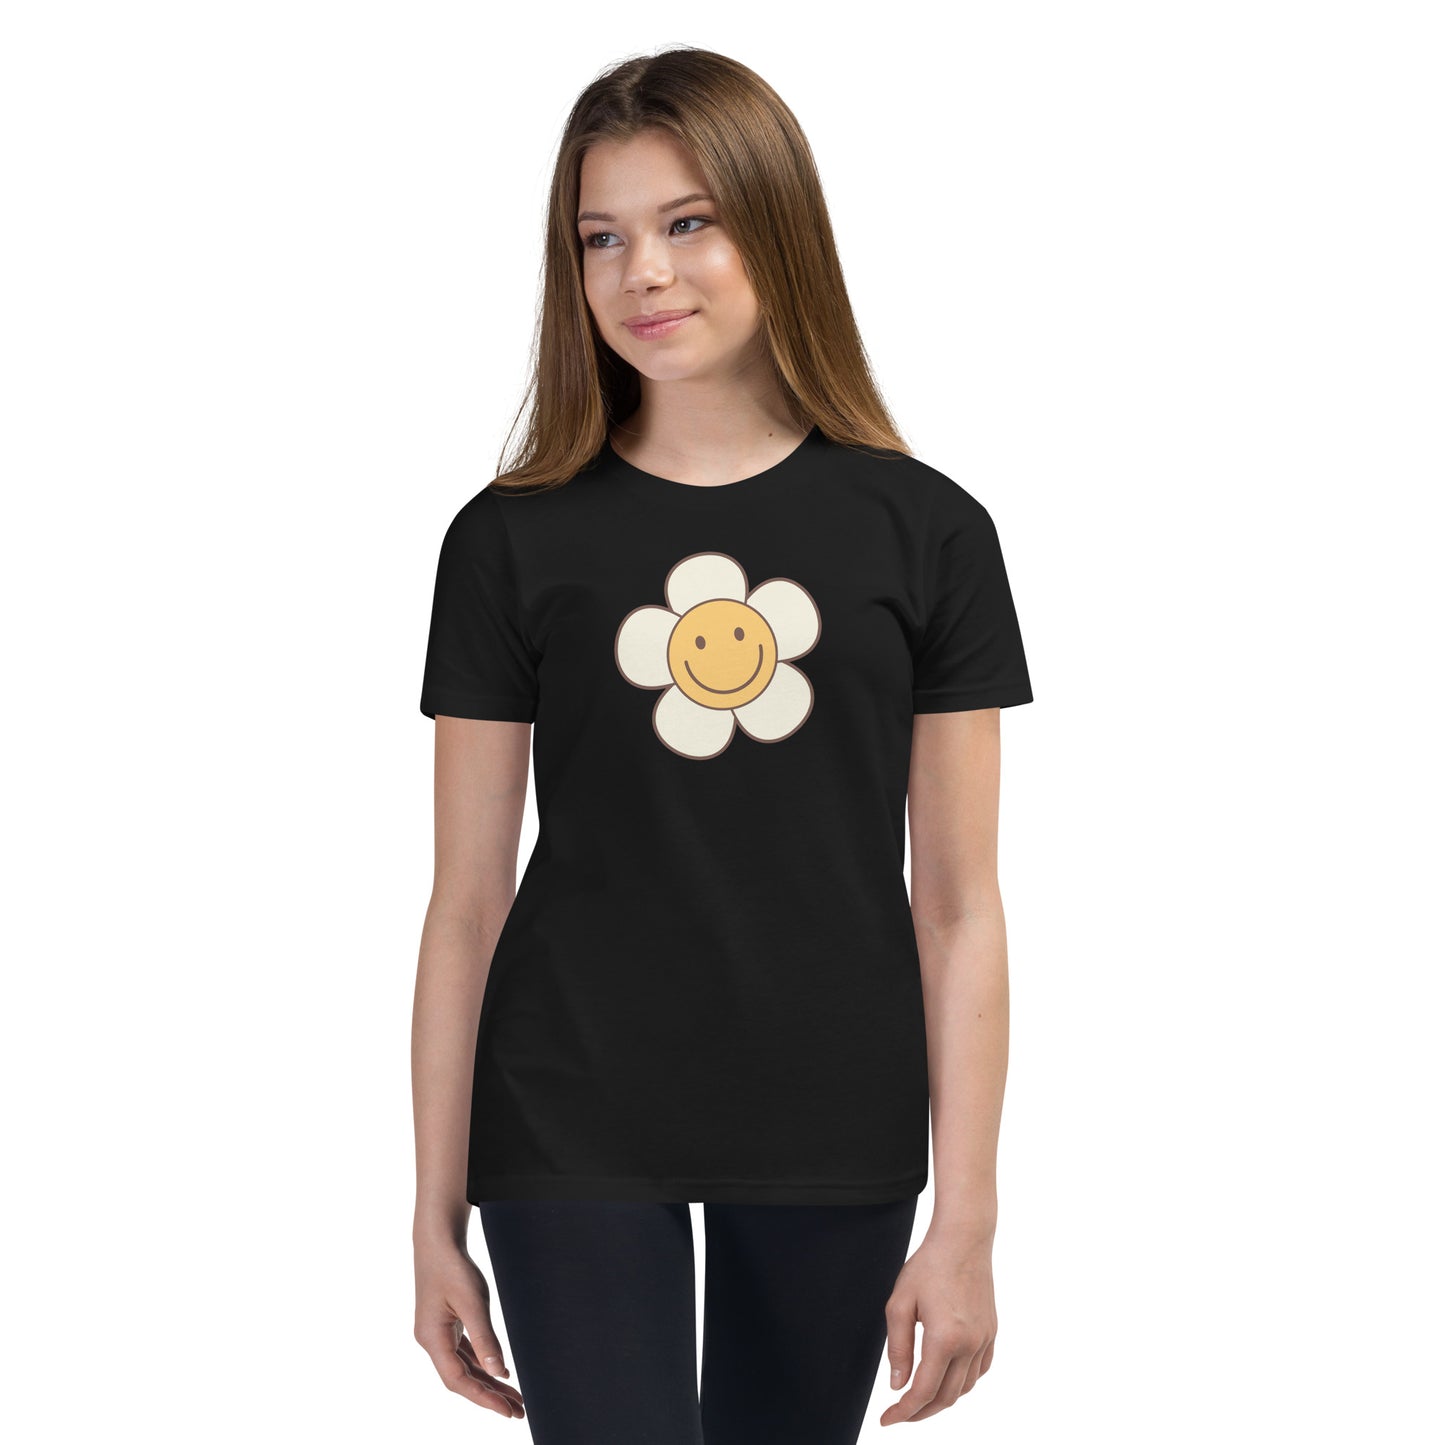 Youth Short Sleeve Tee - Smiling Flower